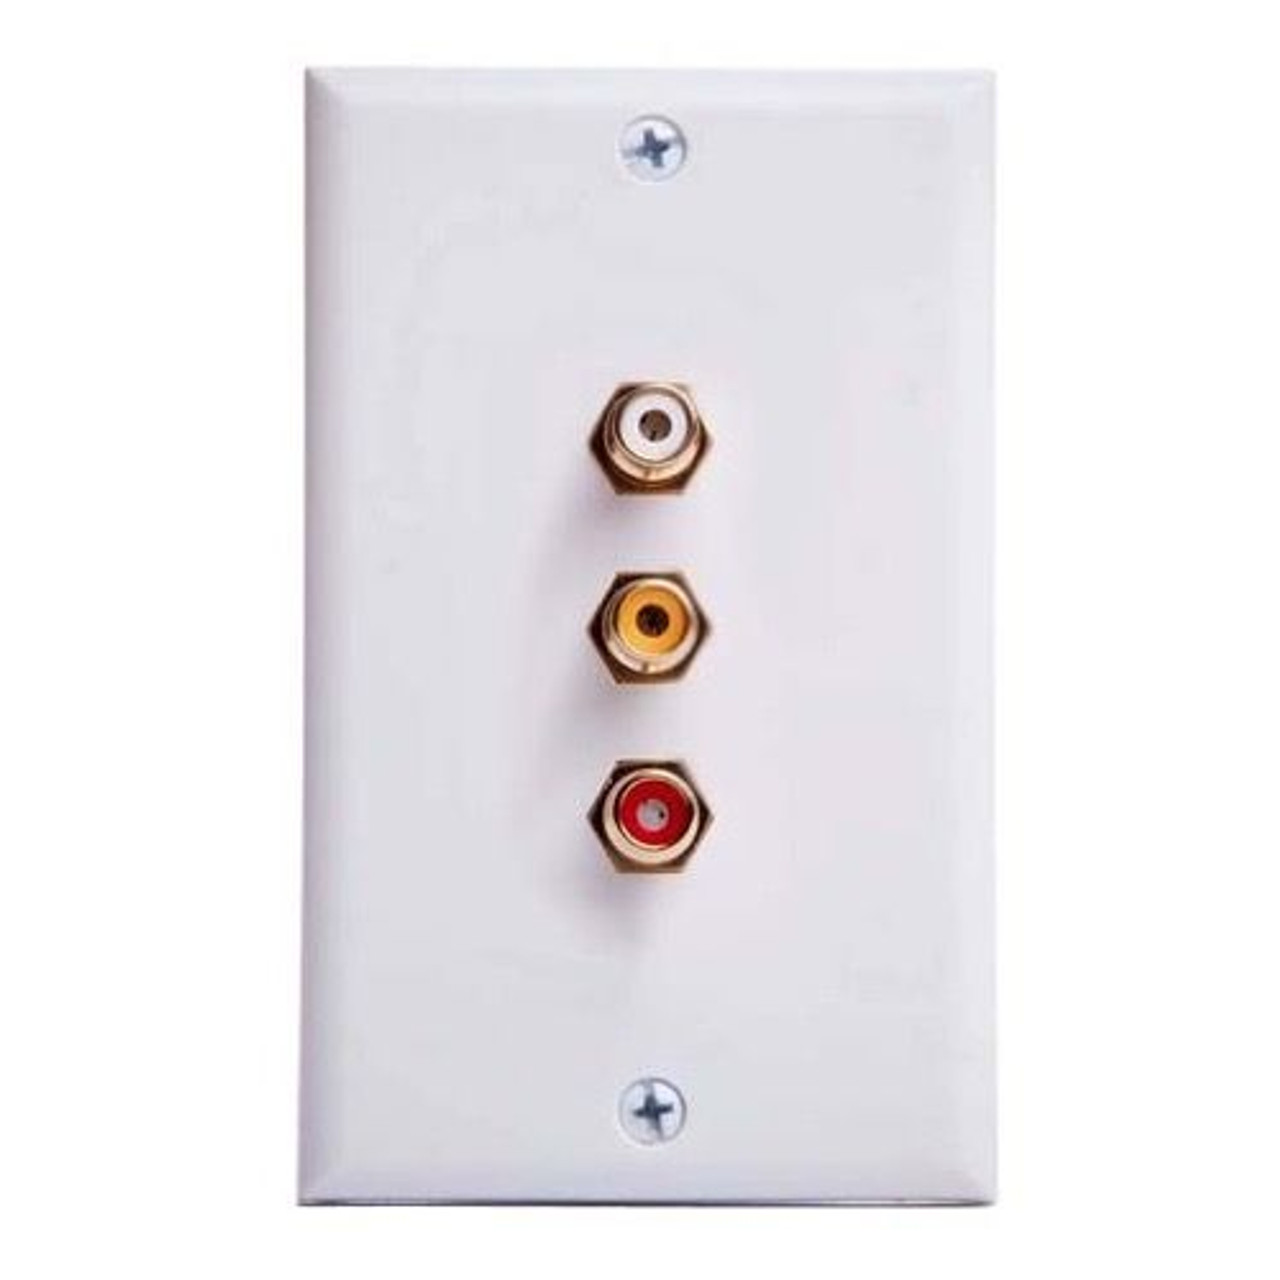 Phillips M62077 3 RCA Jack Wall Plate White Composite Audio Vedeo Stereo 3-Way Gold Signal Line Wire Philips M62077 Flush Mount Outlet Cover with Triple Plugs Hook-Up, Part # M-62077